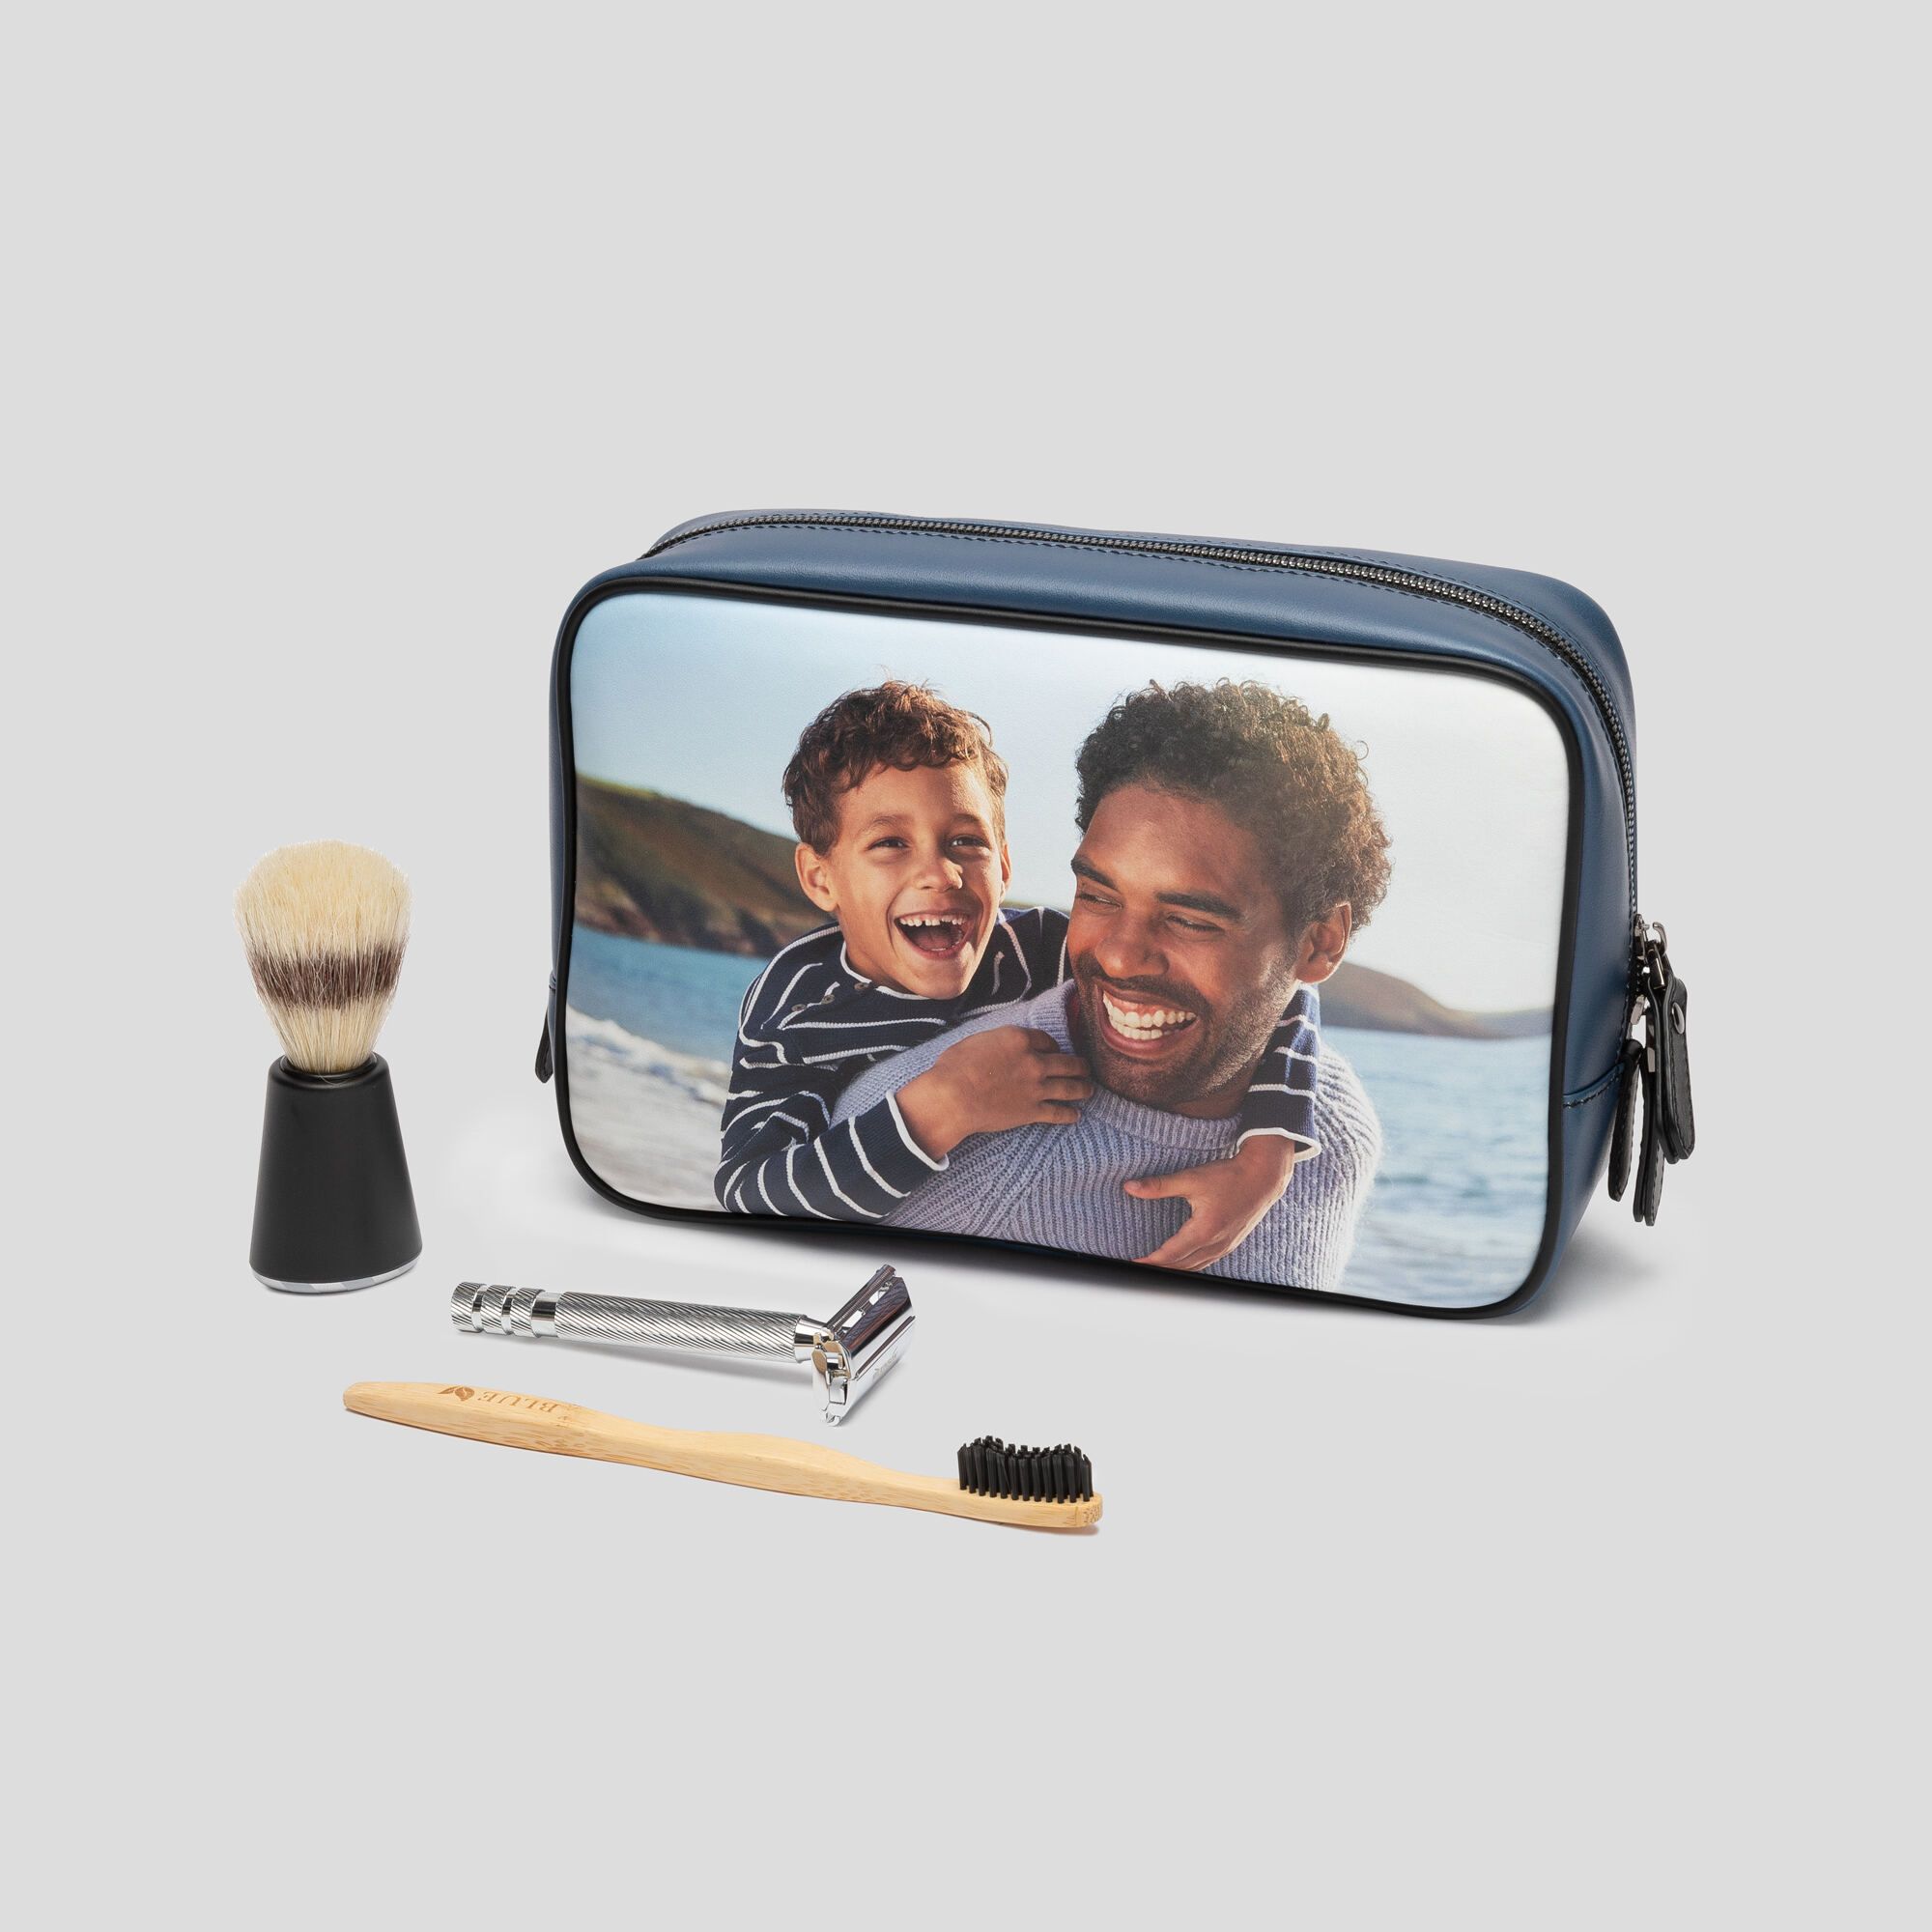 Personalized makeup bags